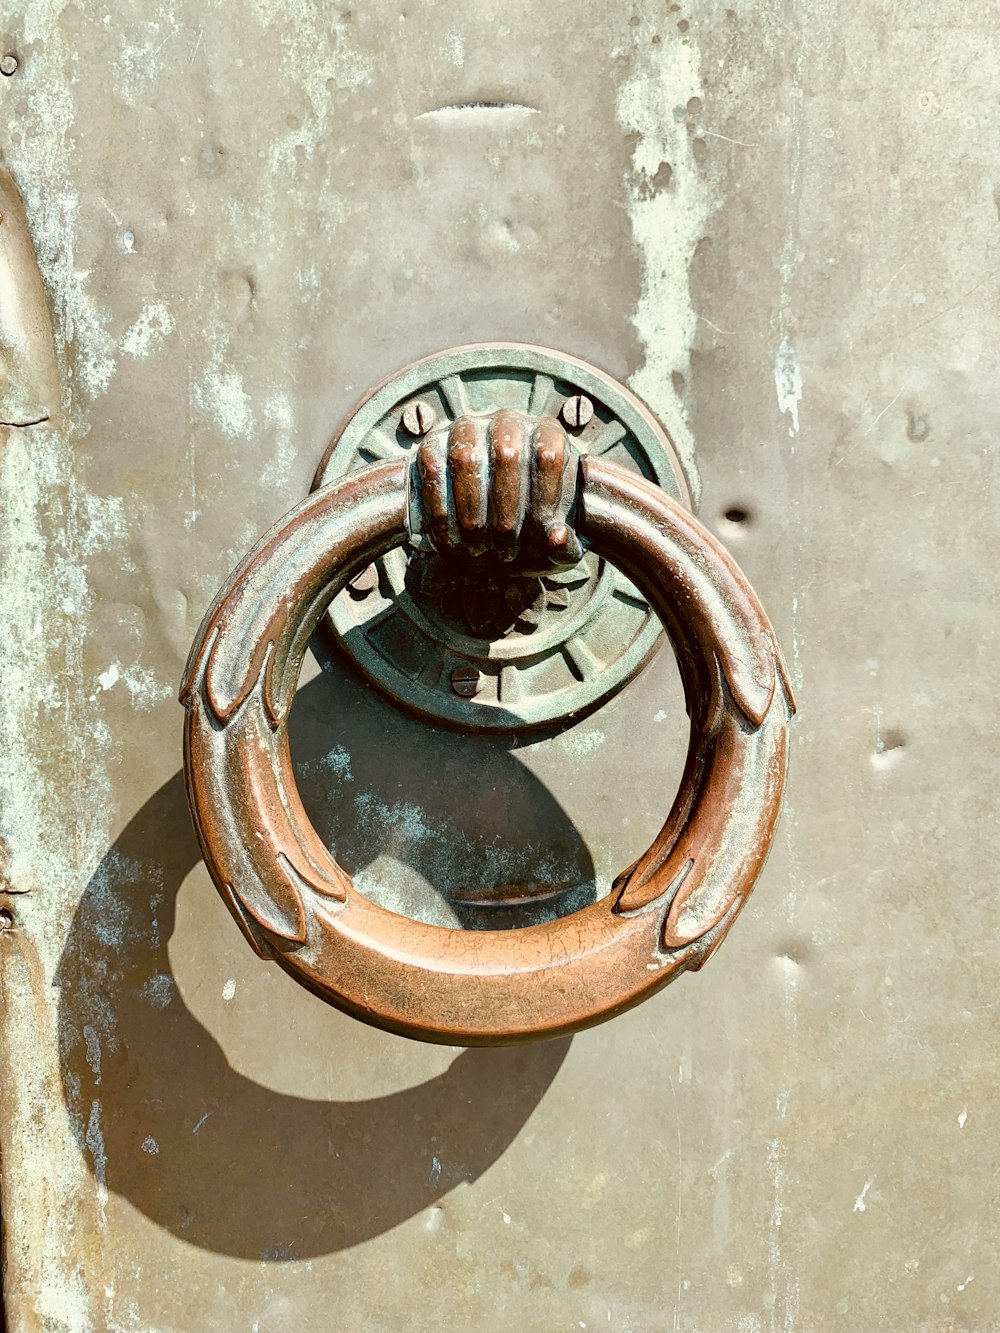 brown and green door knocker close-up photography